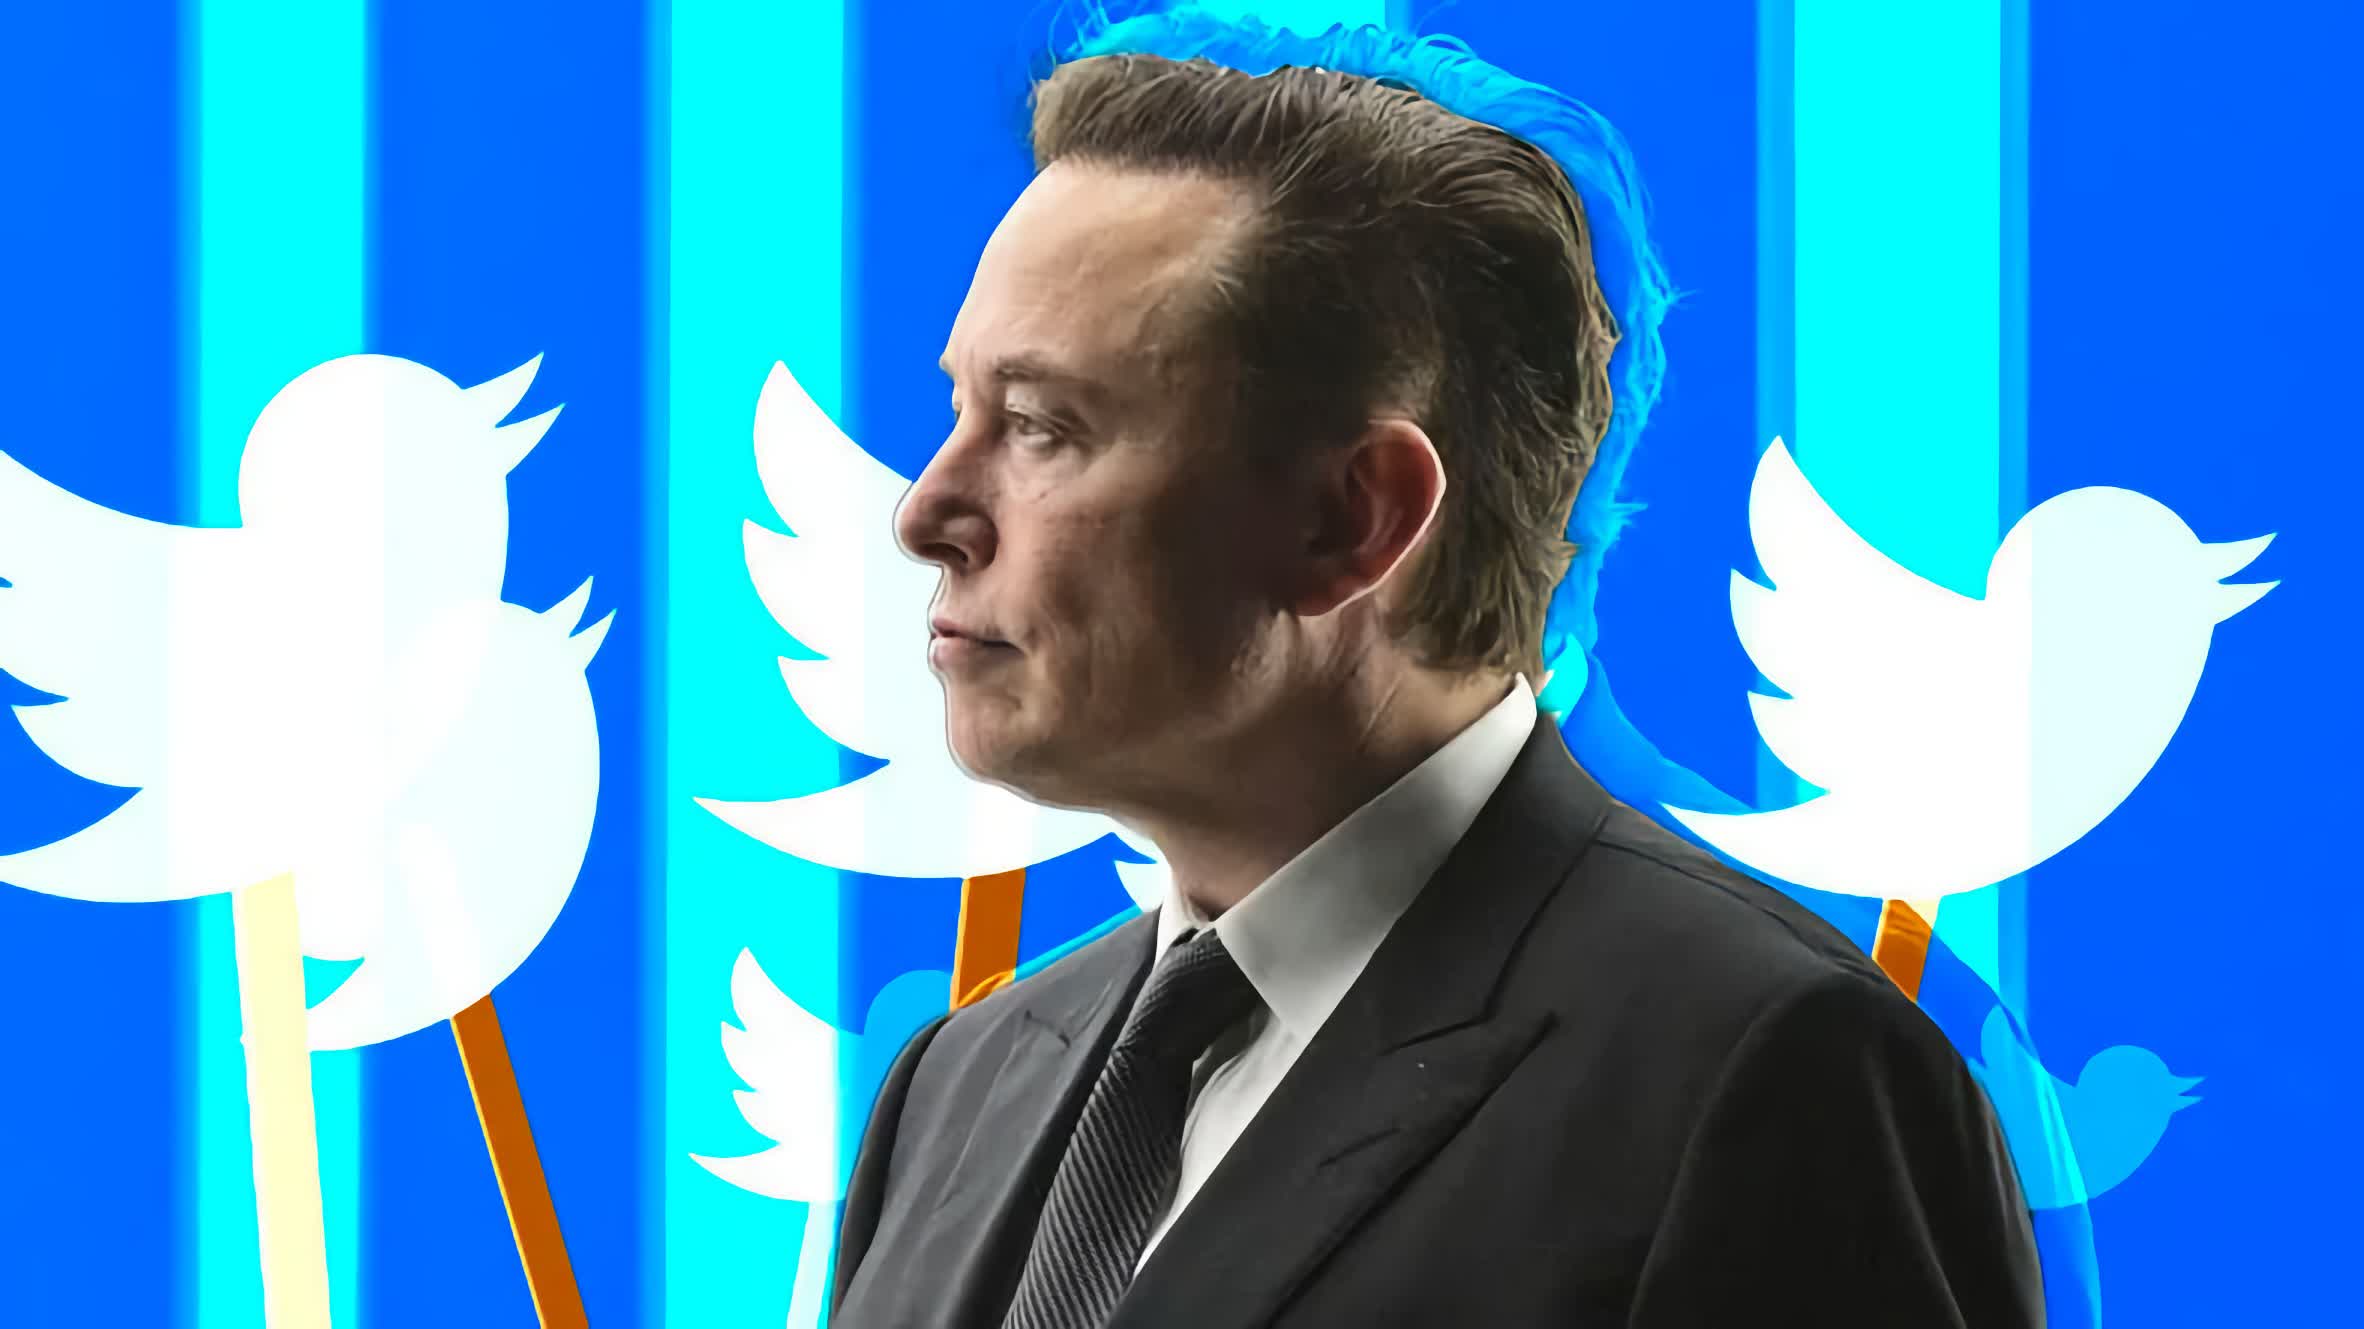 Twitter and Elon Musk throw more insults and allegations at each other